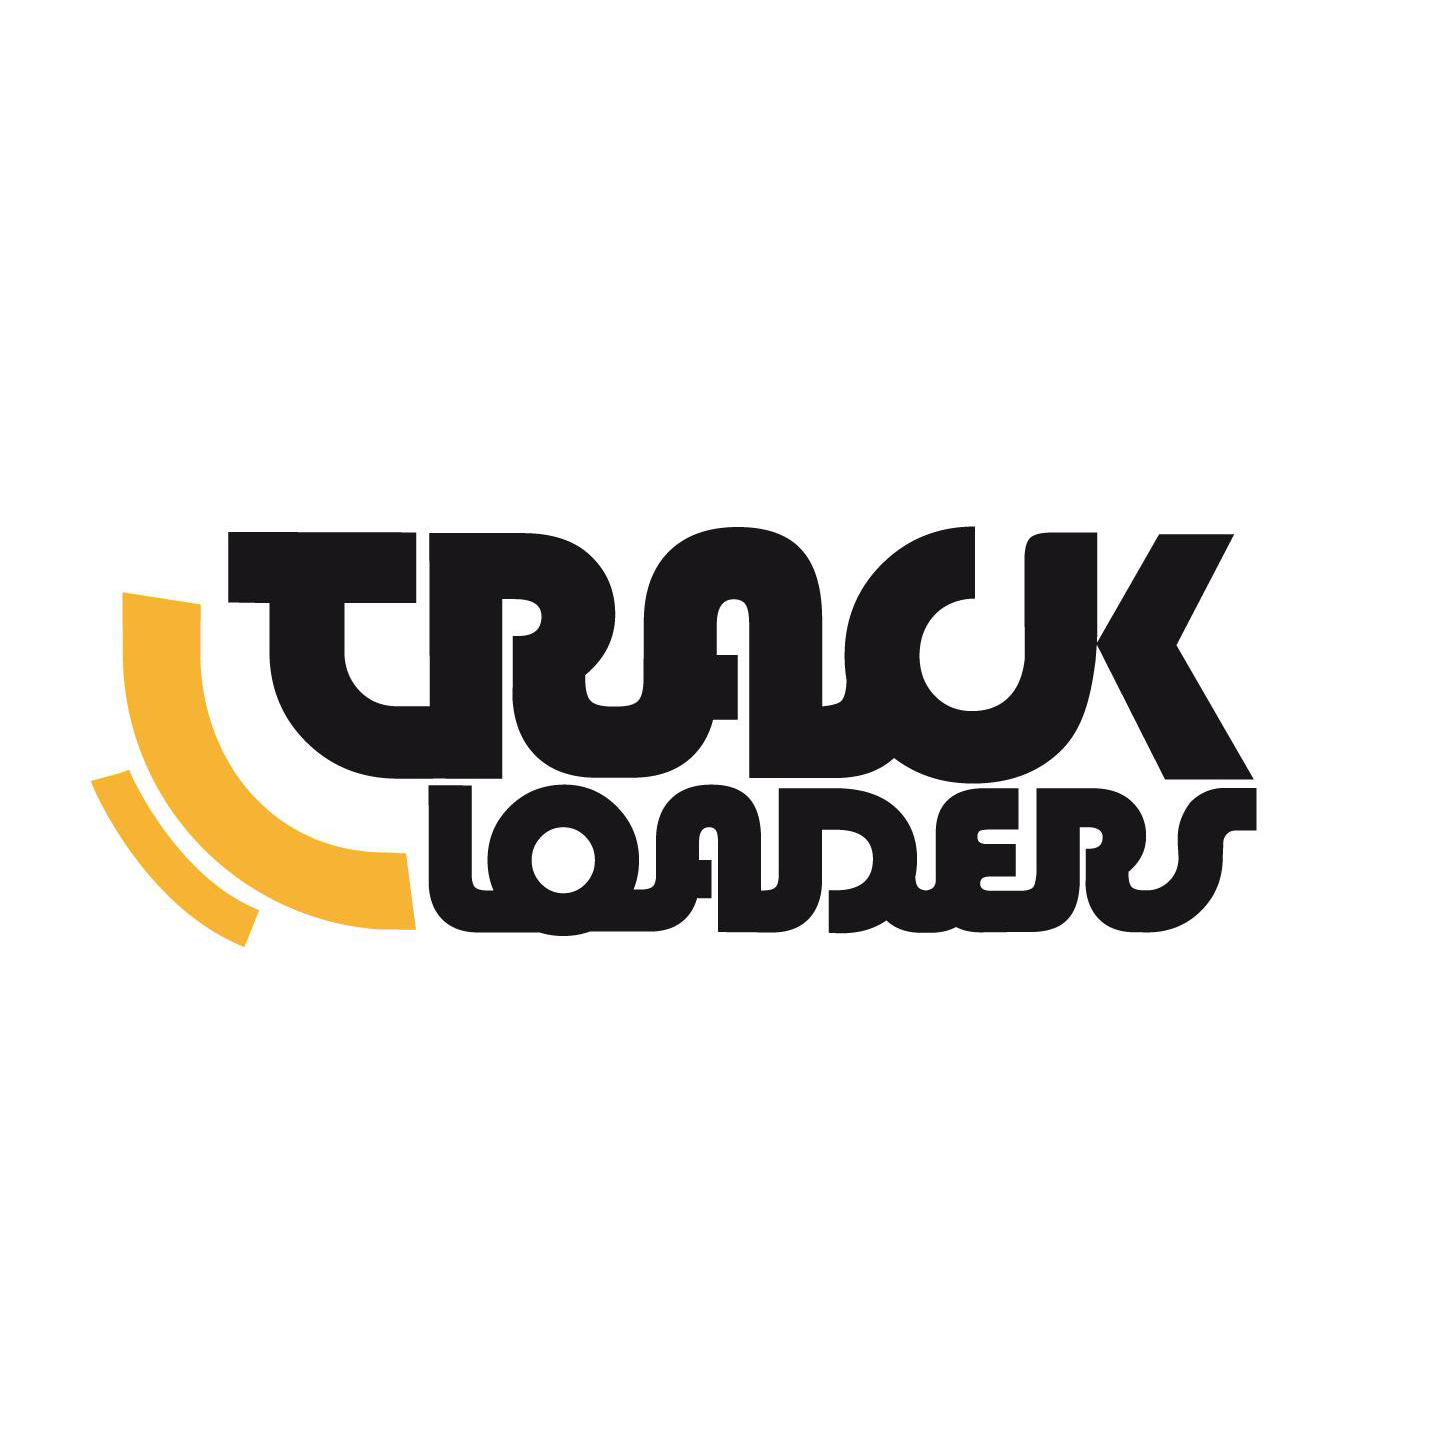 Trackloaders – Cycle / Back Of Beyond (2012 Remix)